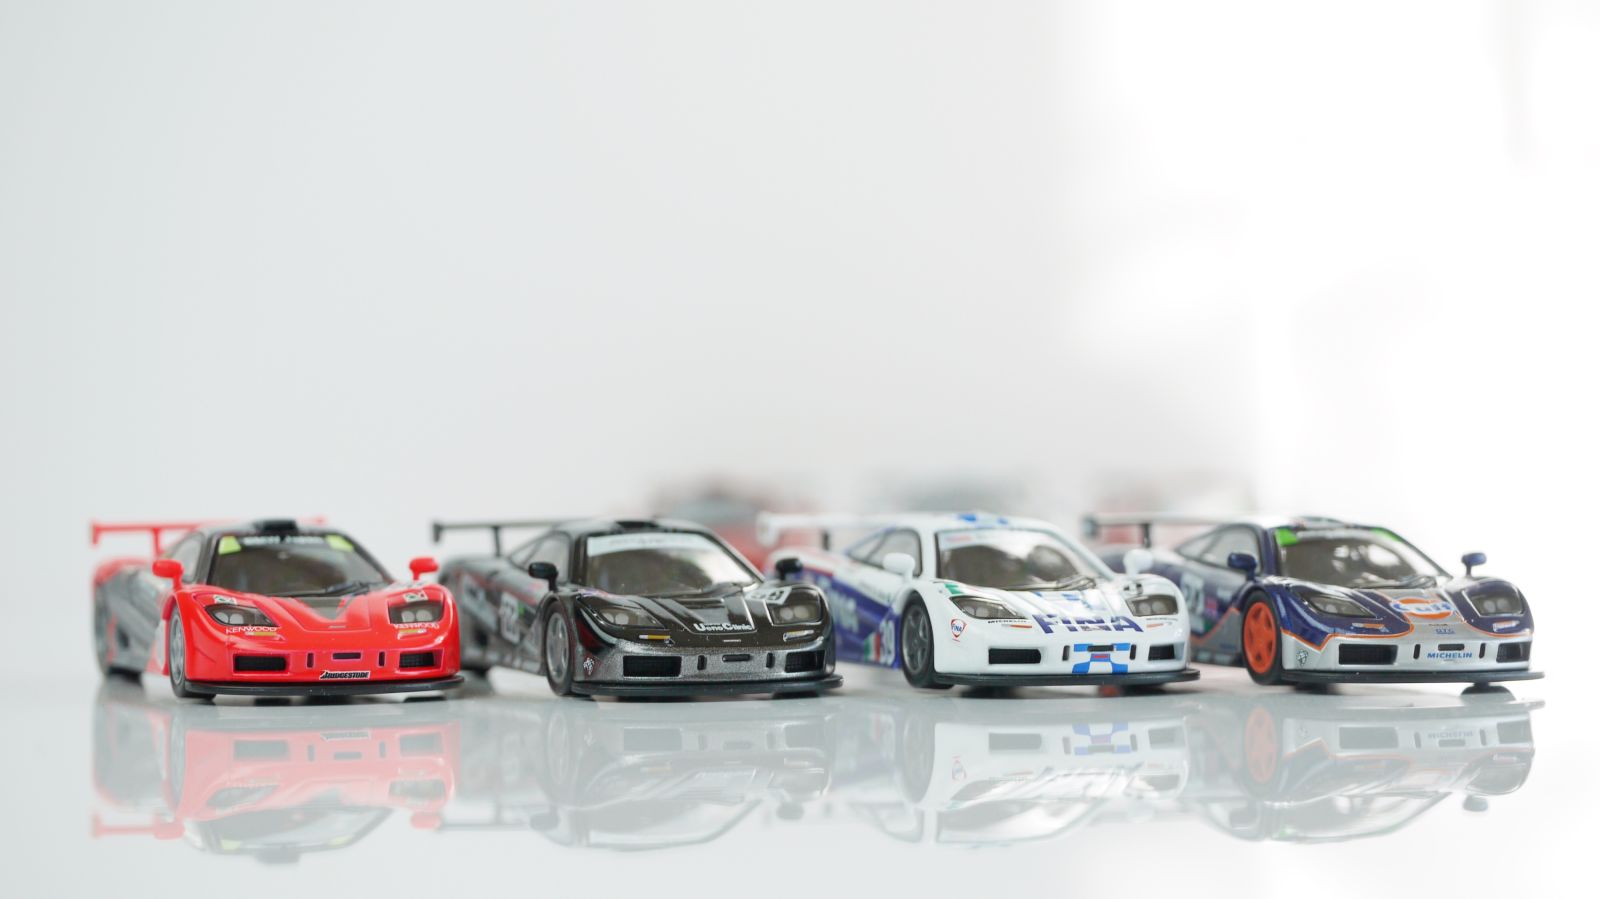 Illustration for article titled Kyosho British Sports Car collection 1/64 #77 - Project Speeding Kiwi #2 - 1995 McLaren F1 GTR